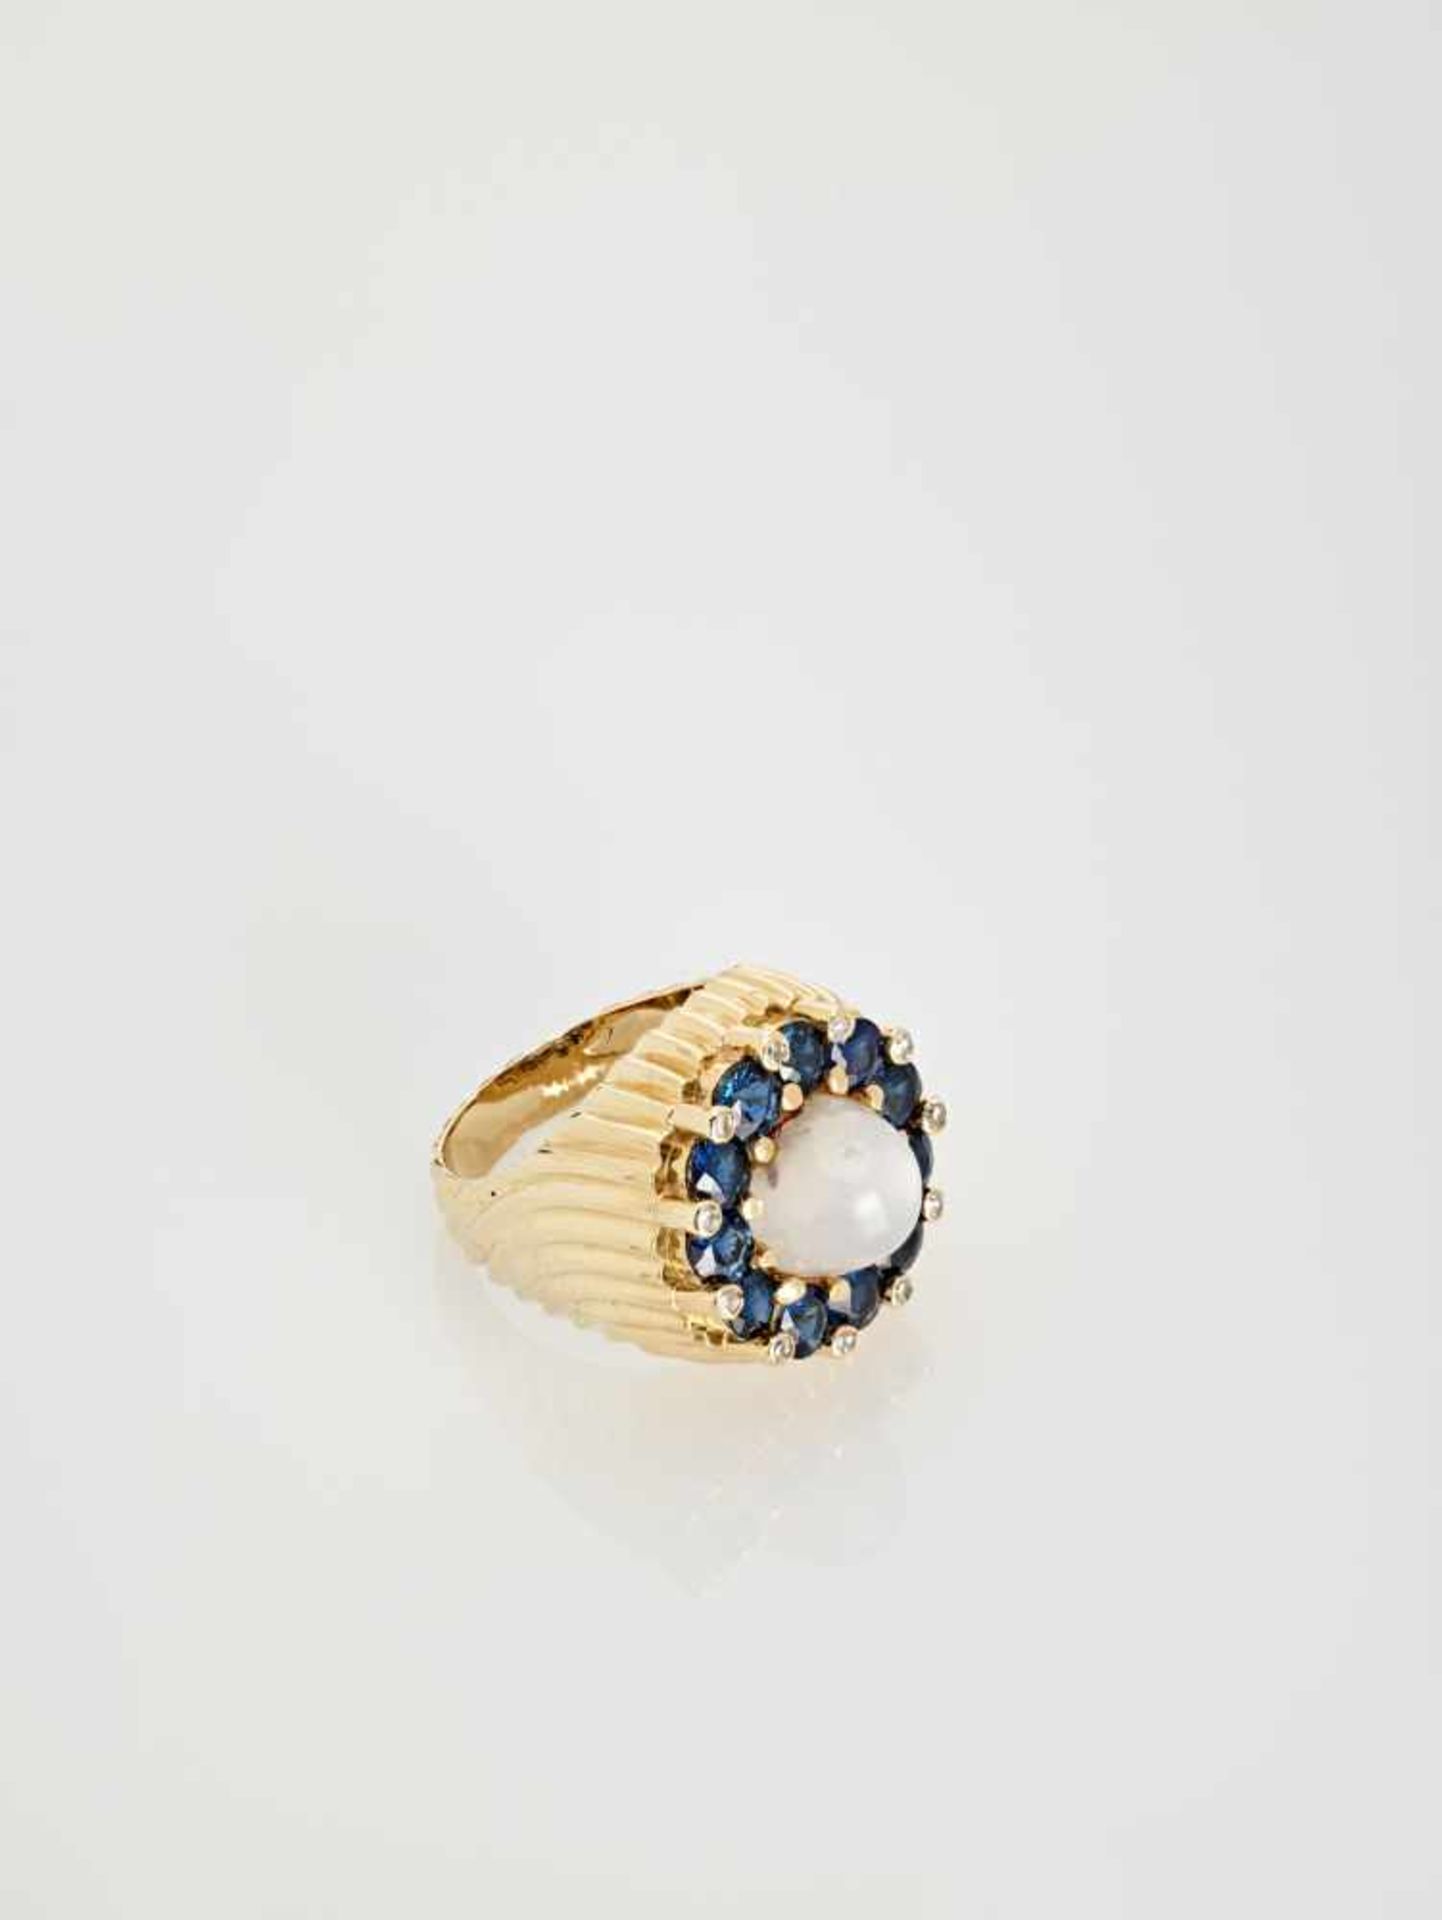 A SAPPHIRE, DIAMOND AND MOONSTONE YELLOW GOLD COCKTAIL RING BY PALTSCHOAustriaErwin Paltscho, - Image 6 of 7